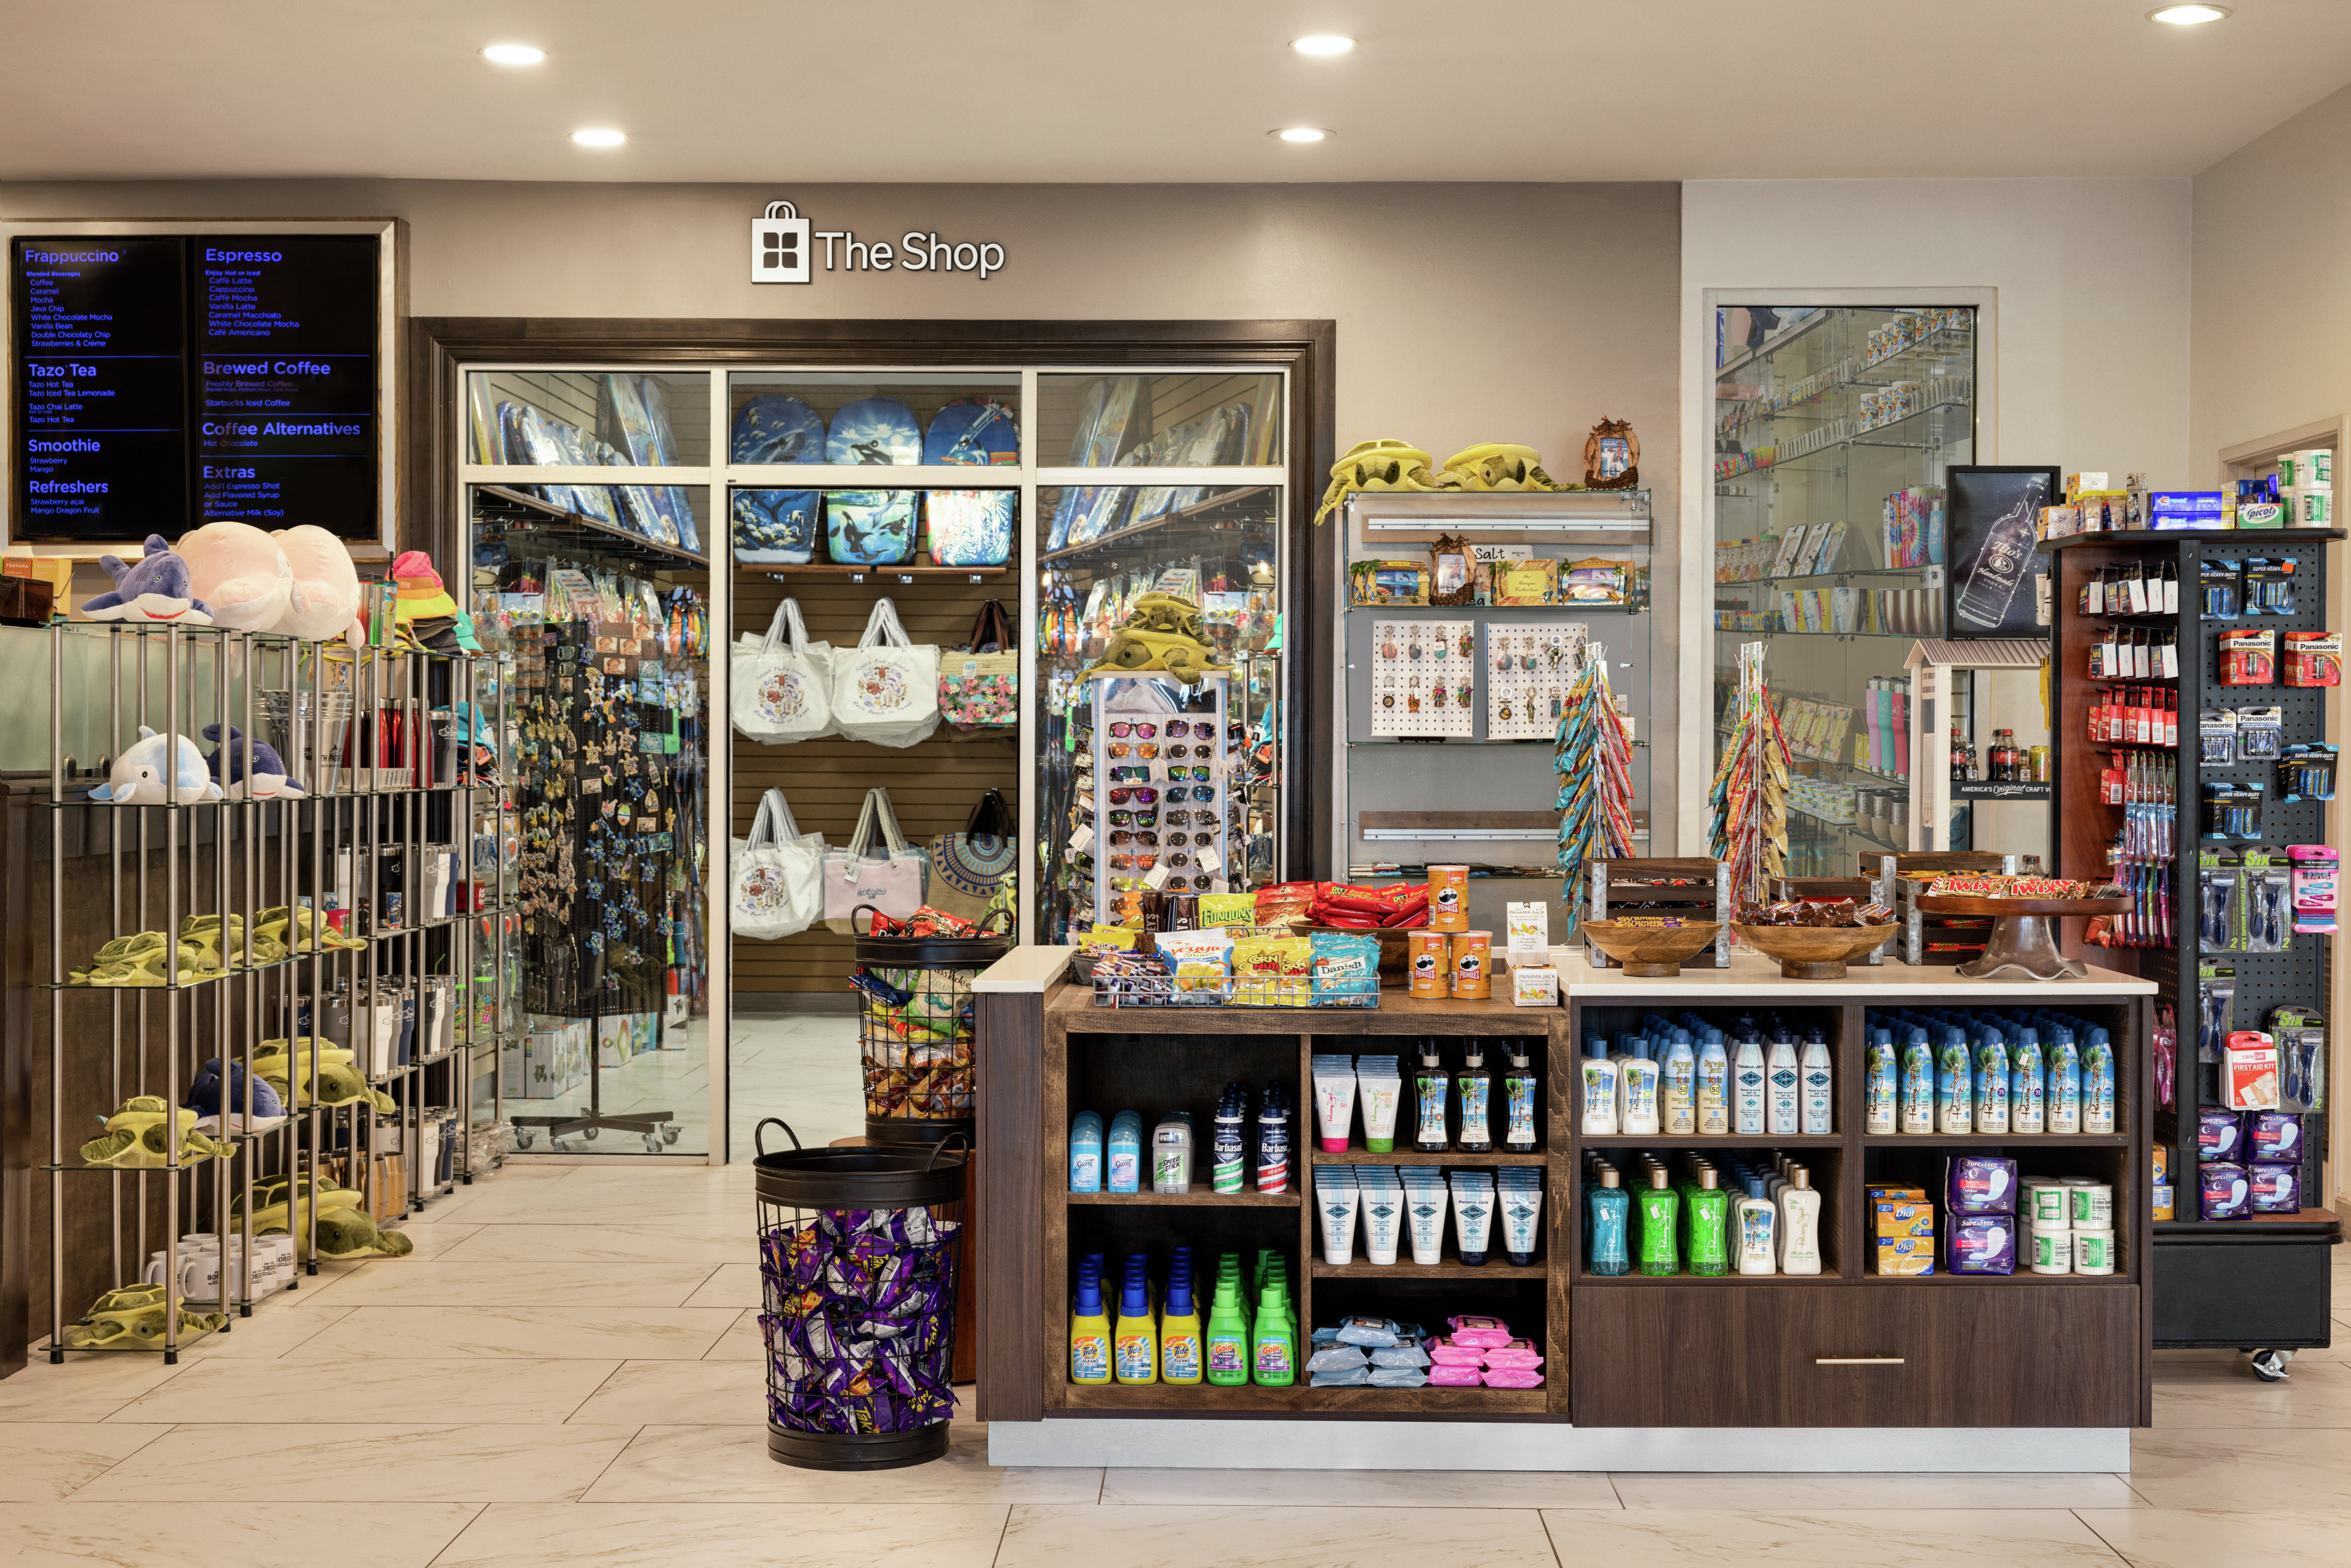 Convenient on-site gift shop overflowing with fun keepsakes and convenient necessities.